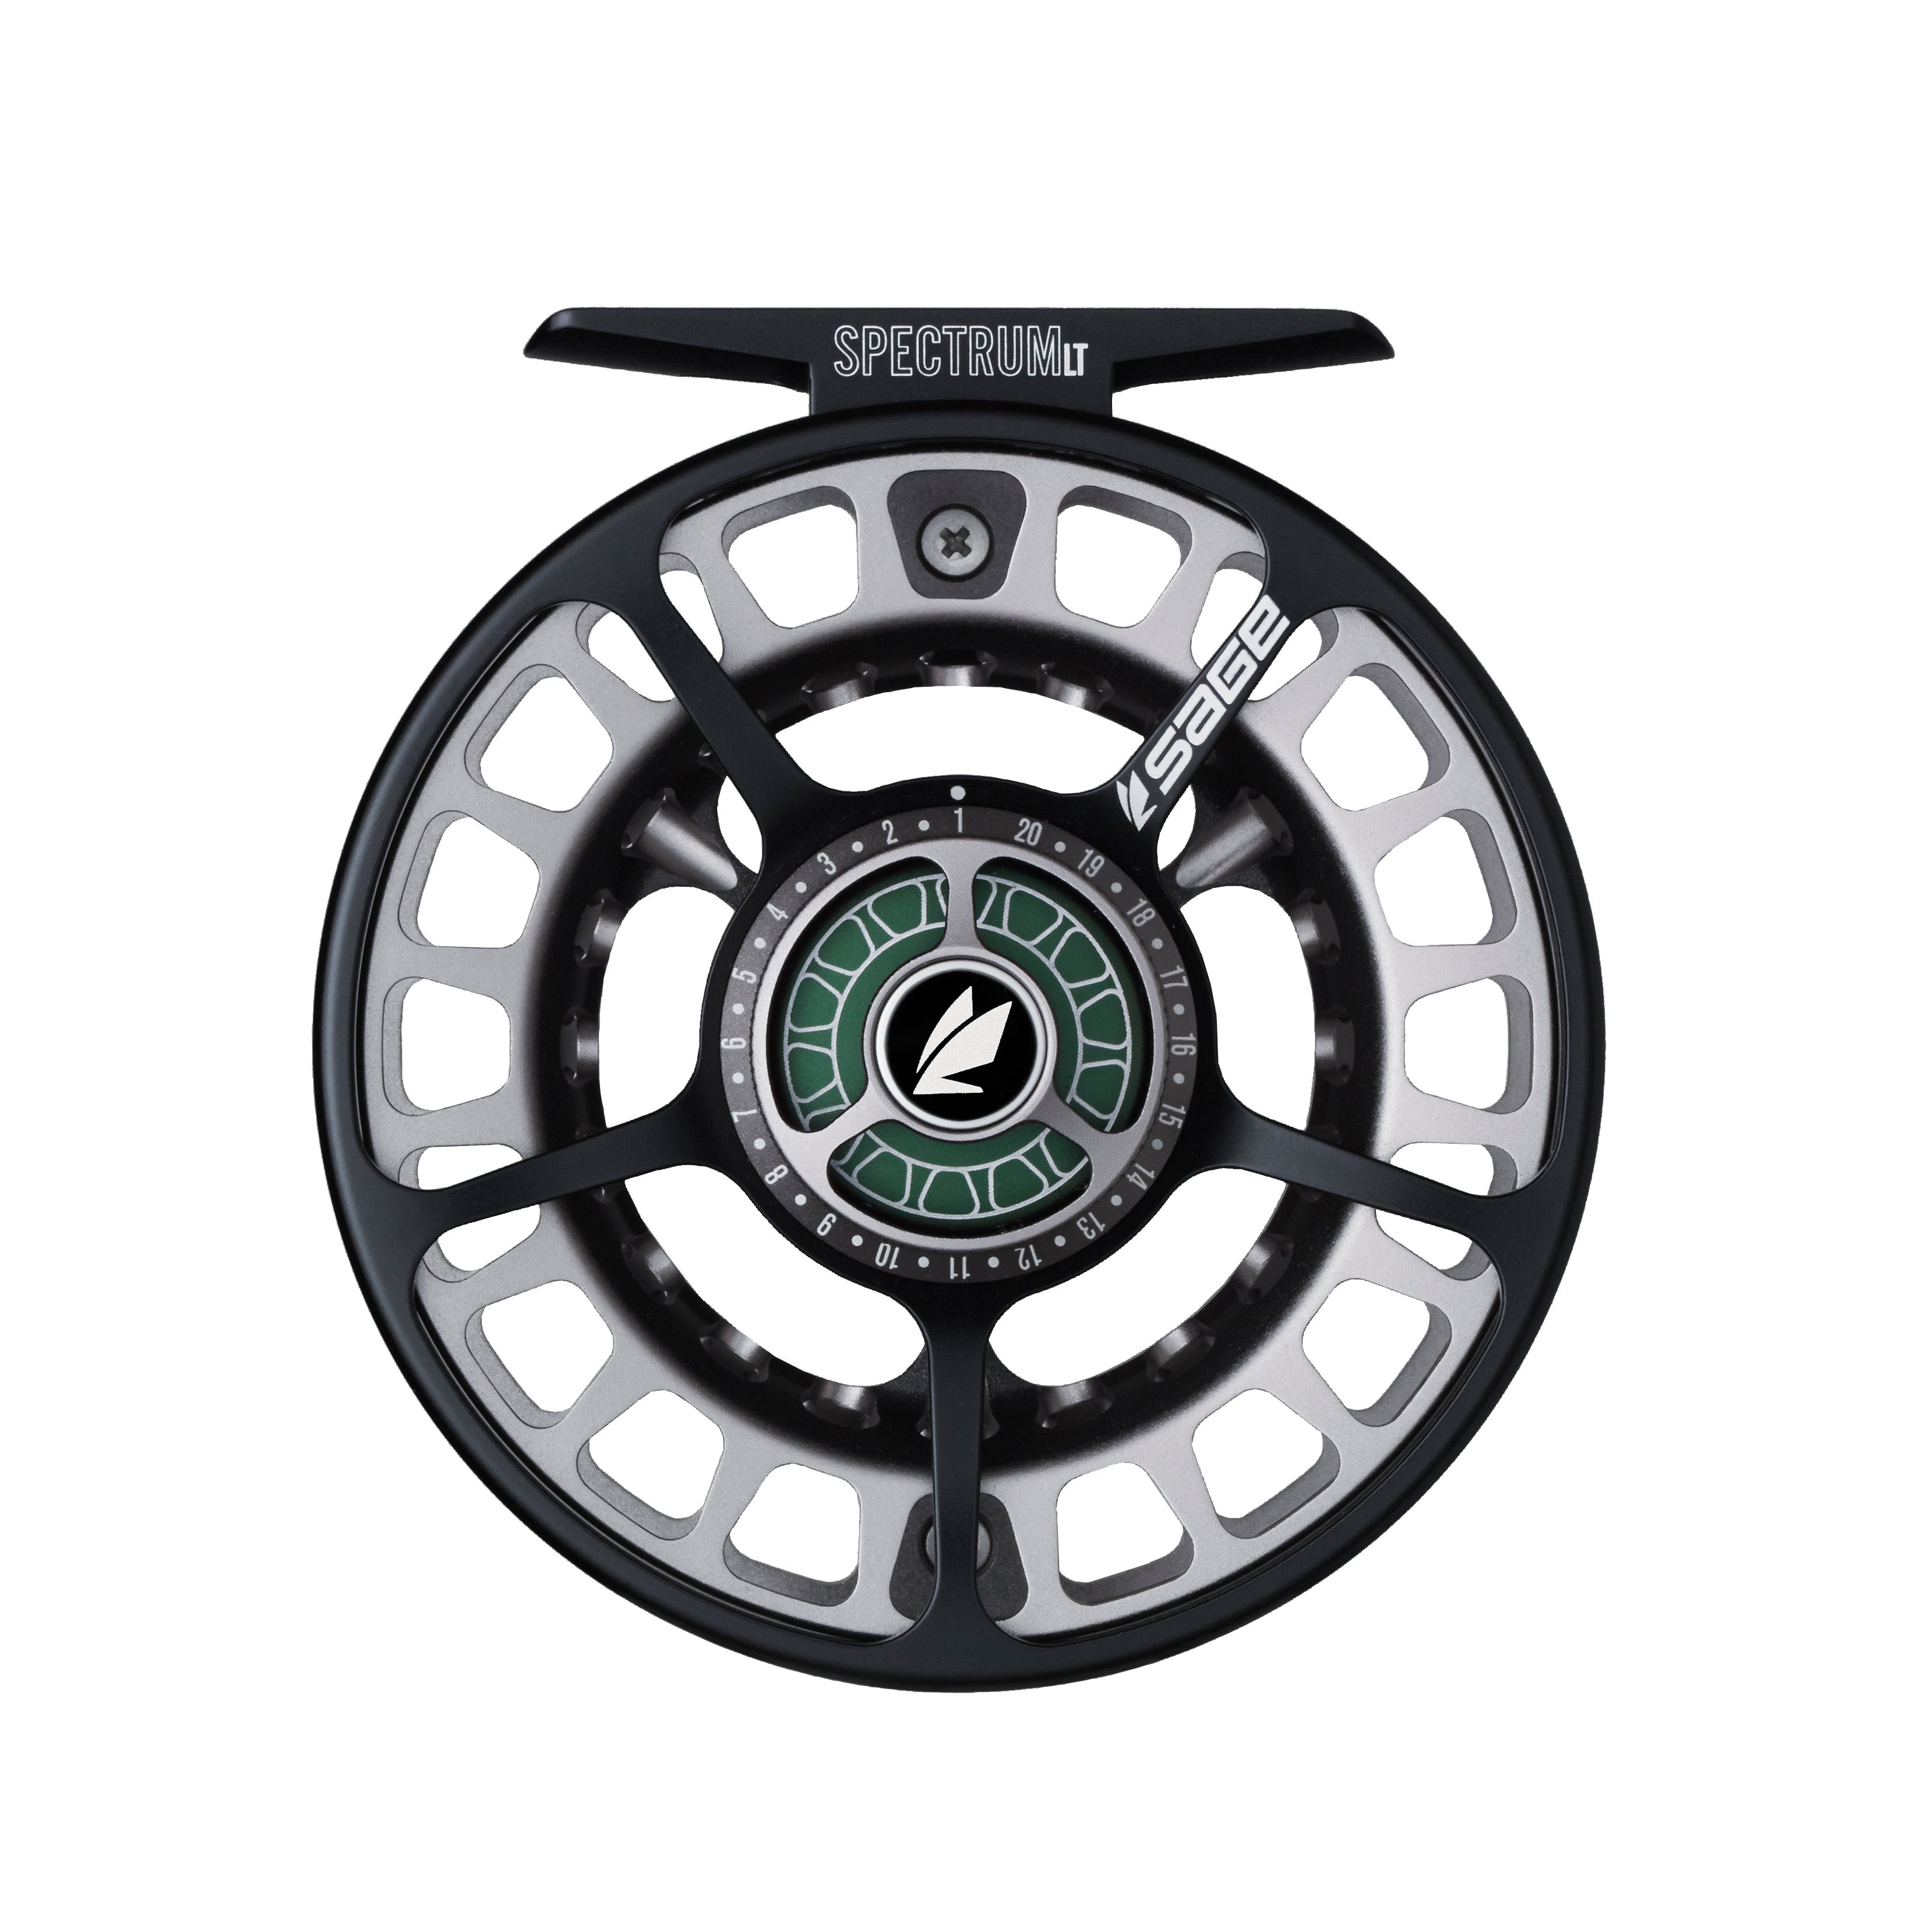 3wt 7'6 Rogue Edition with Qualifly Maverick 2/3 reel floating line and  Backing Package Deal